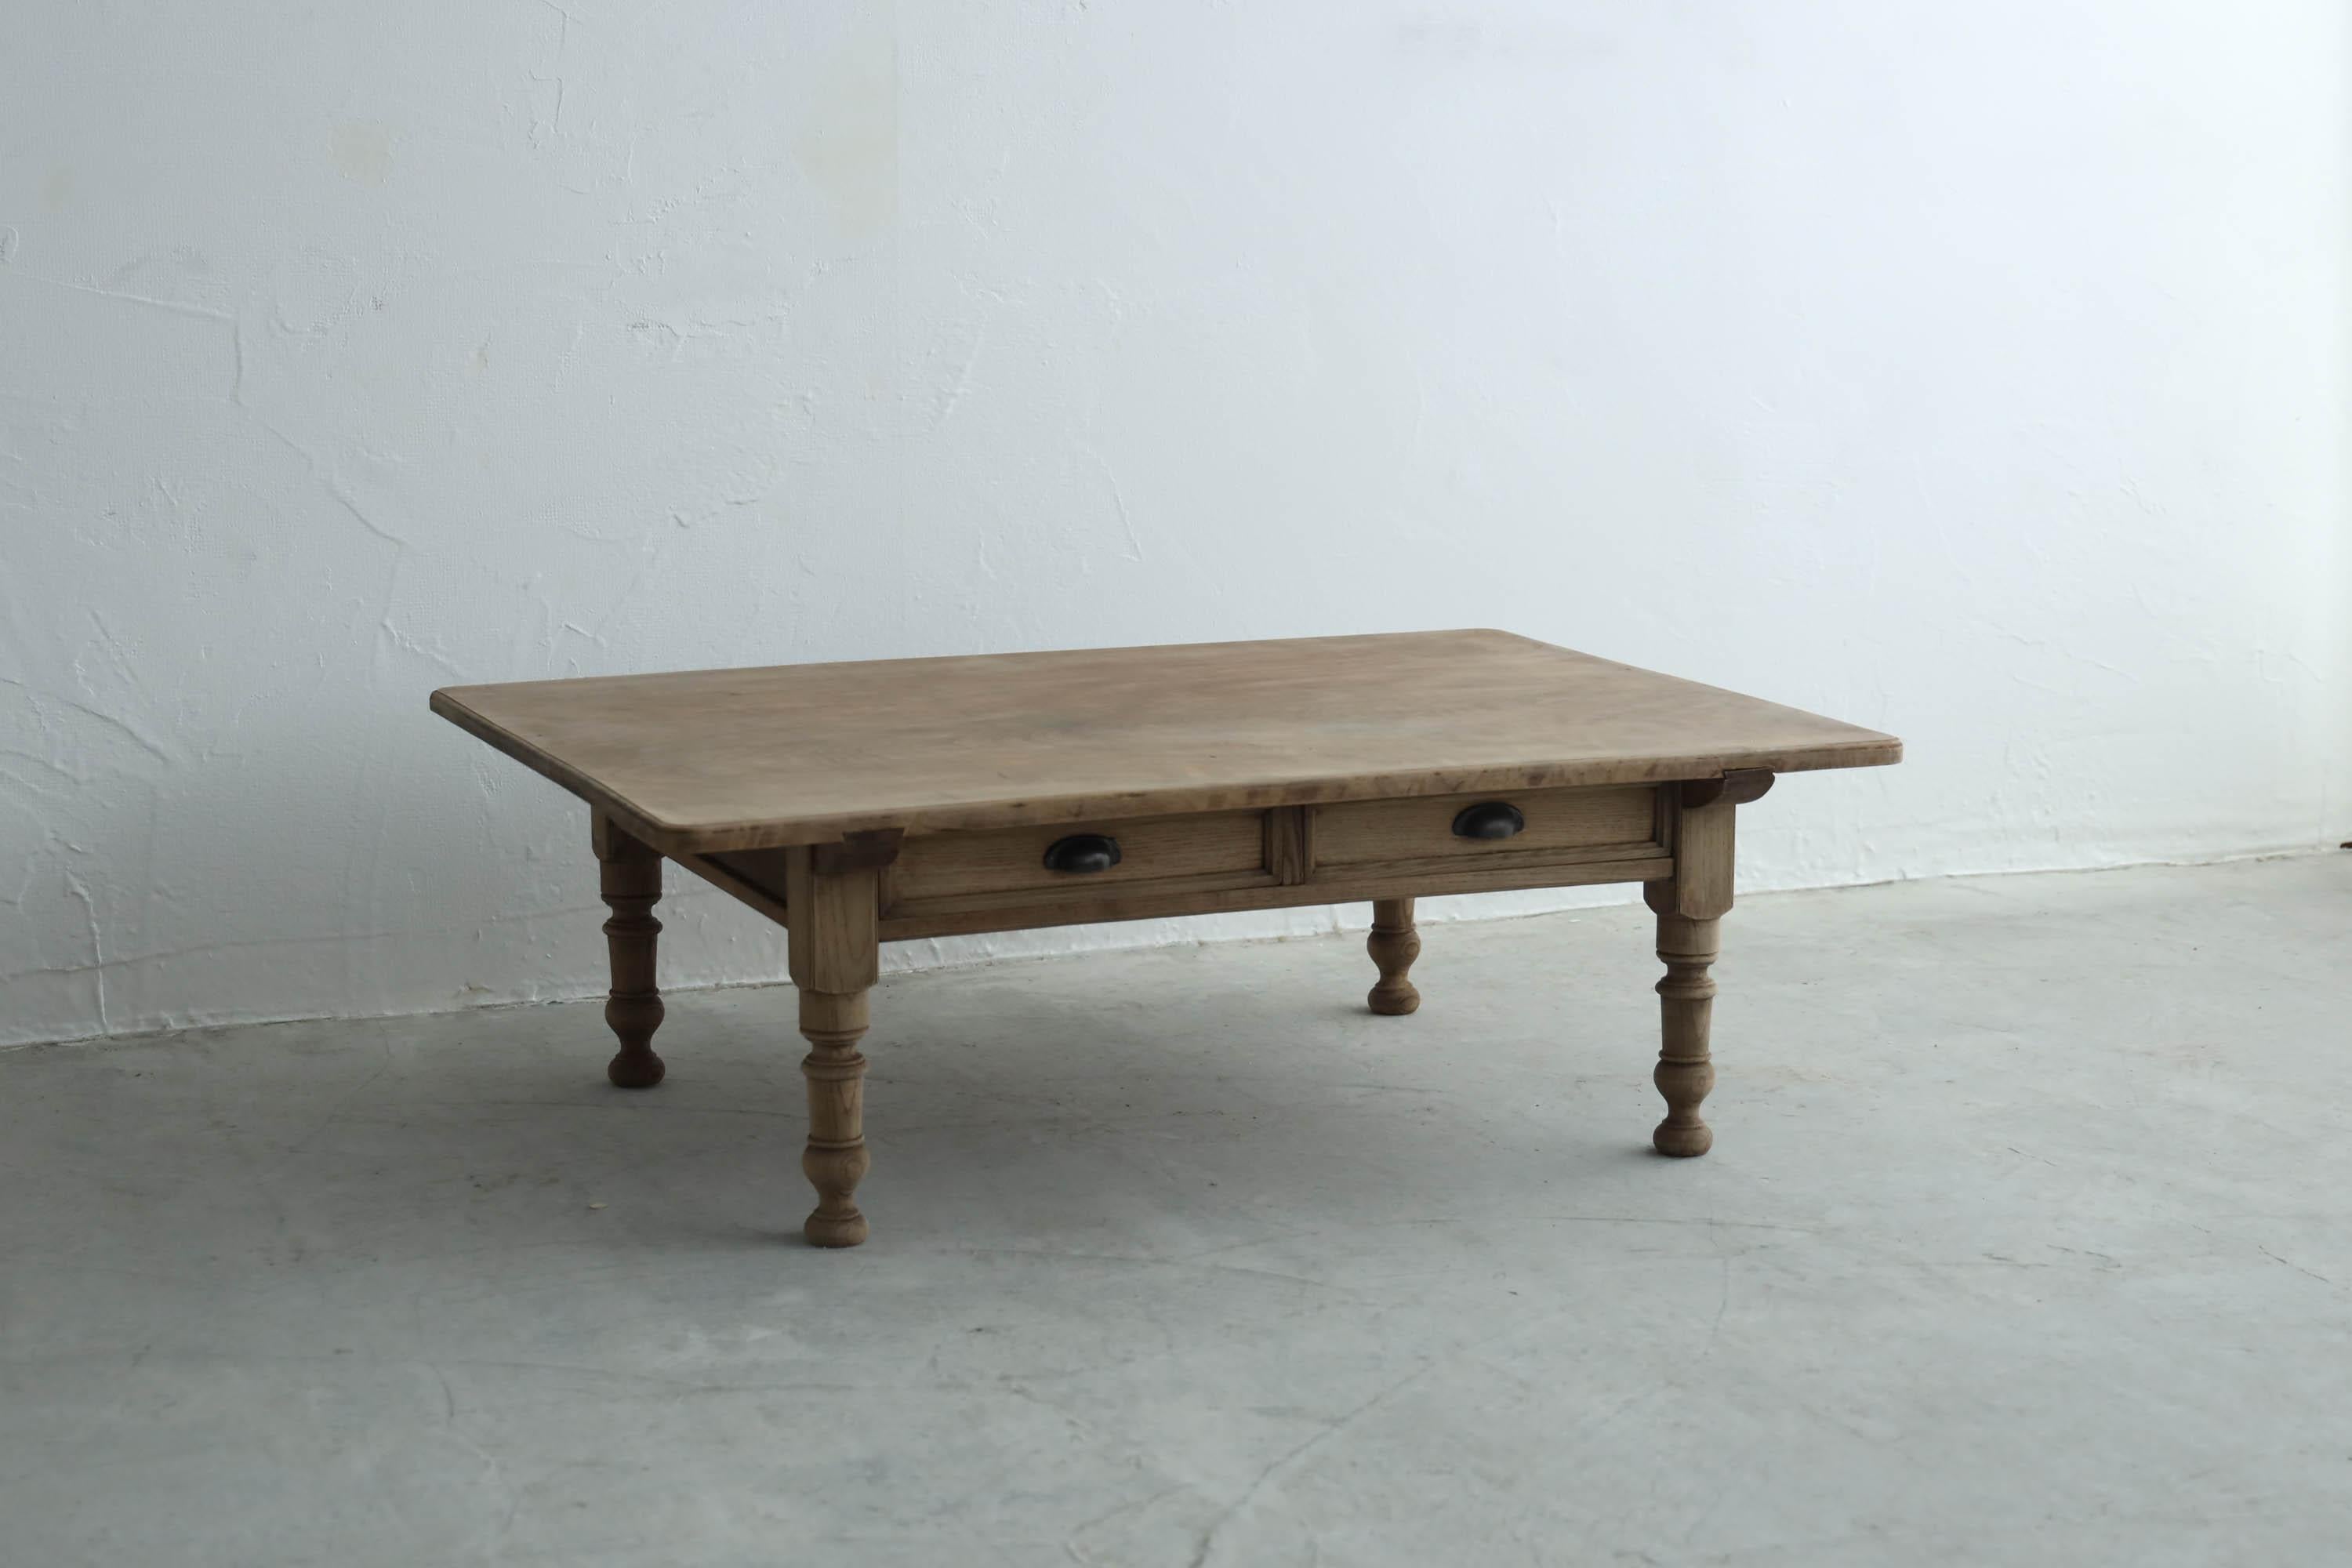 Hand-Crafted Japanese Antique Coffee Table, Desk, Single Plate, Wabi-Sabi, Early 20th Century